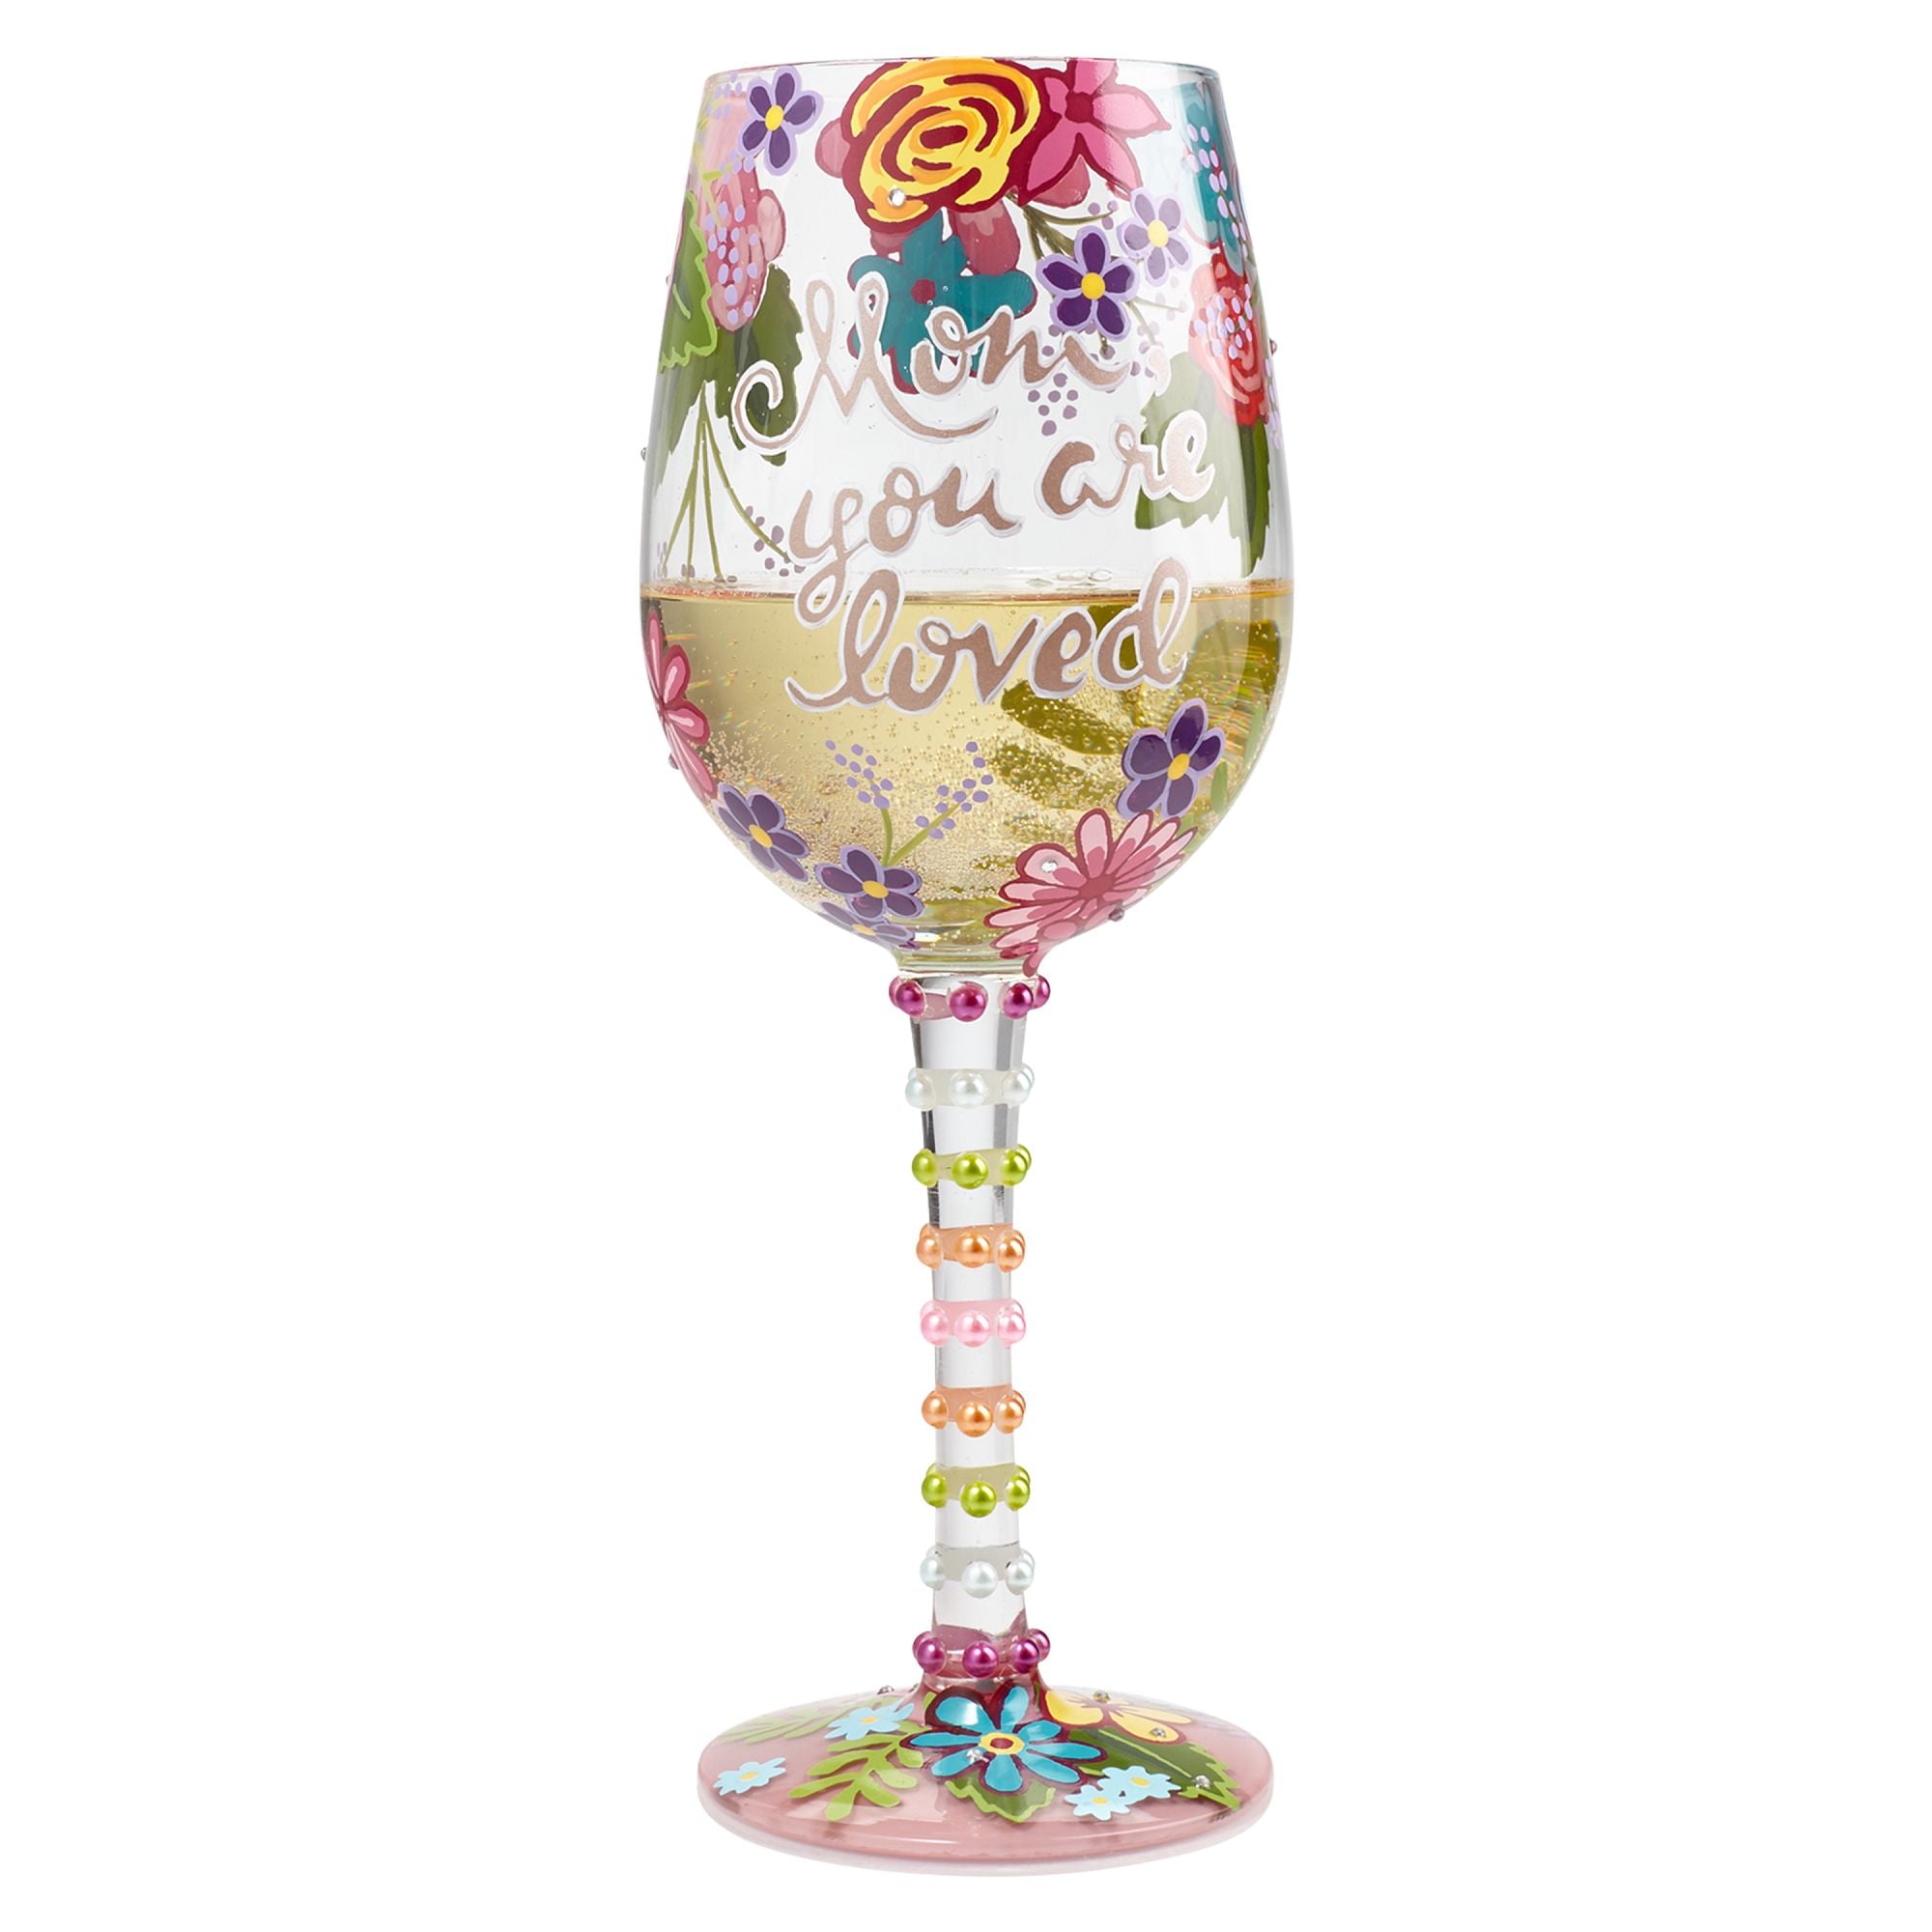 Loving the Beach Life Wine Glasses - Beach House Decor -Vacation Home Gift  Ideas - Set of Two 20oz